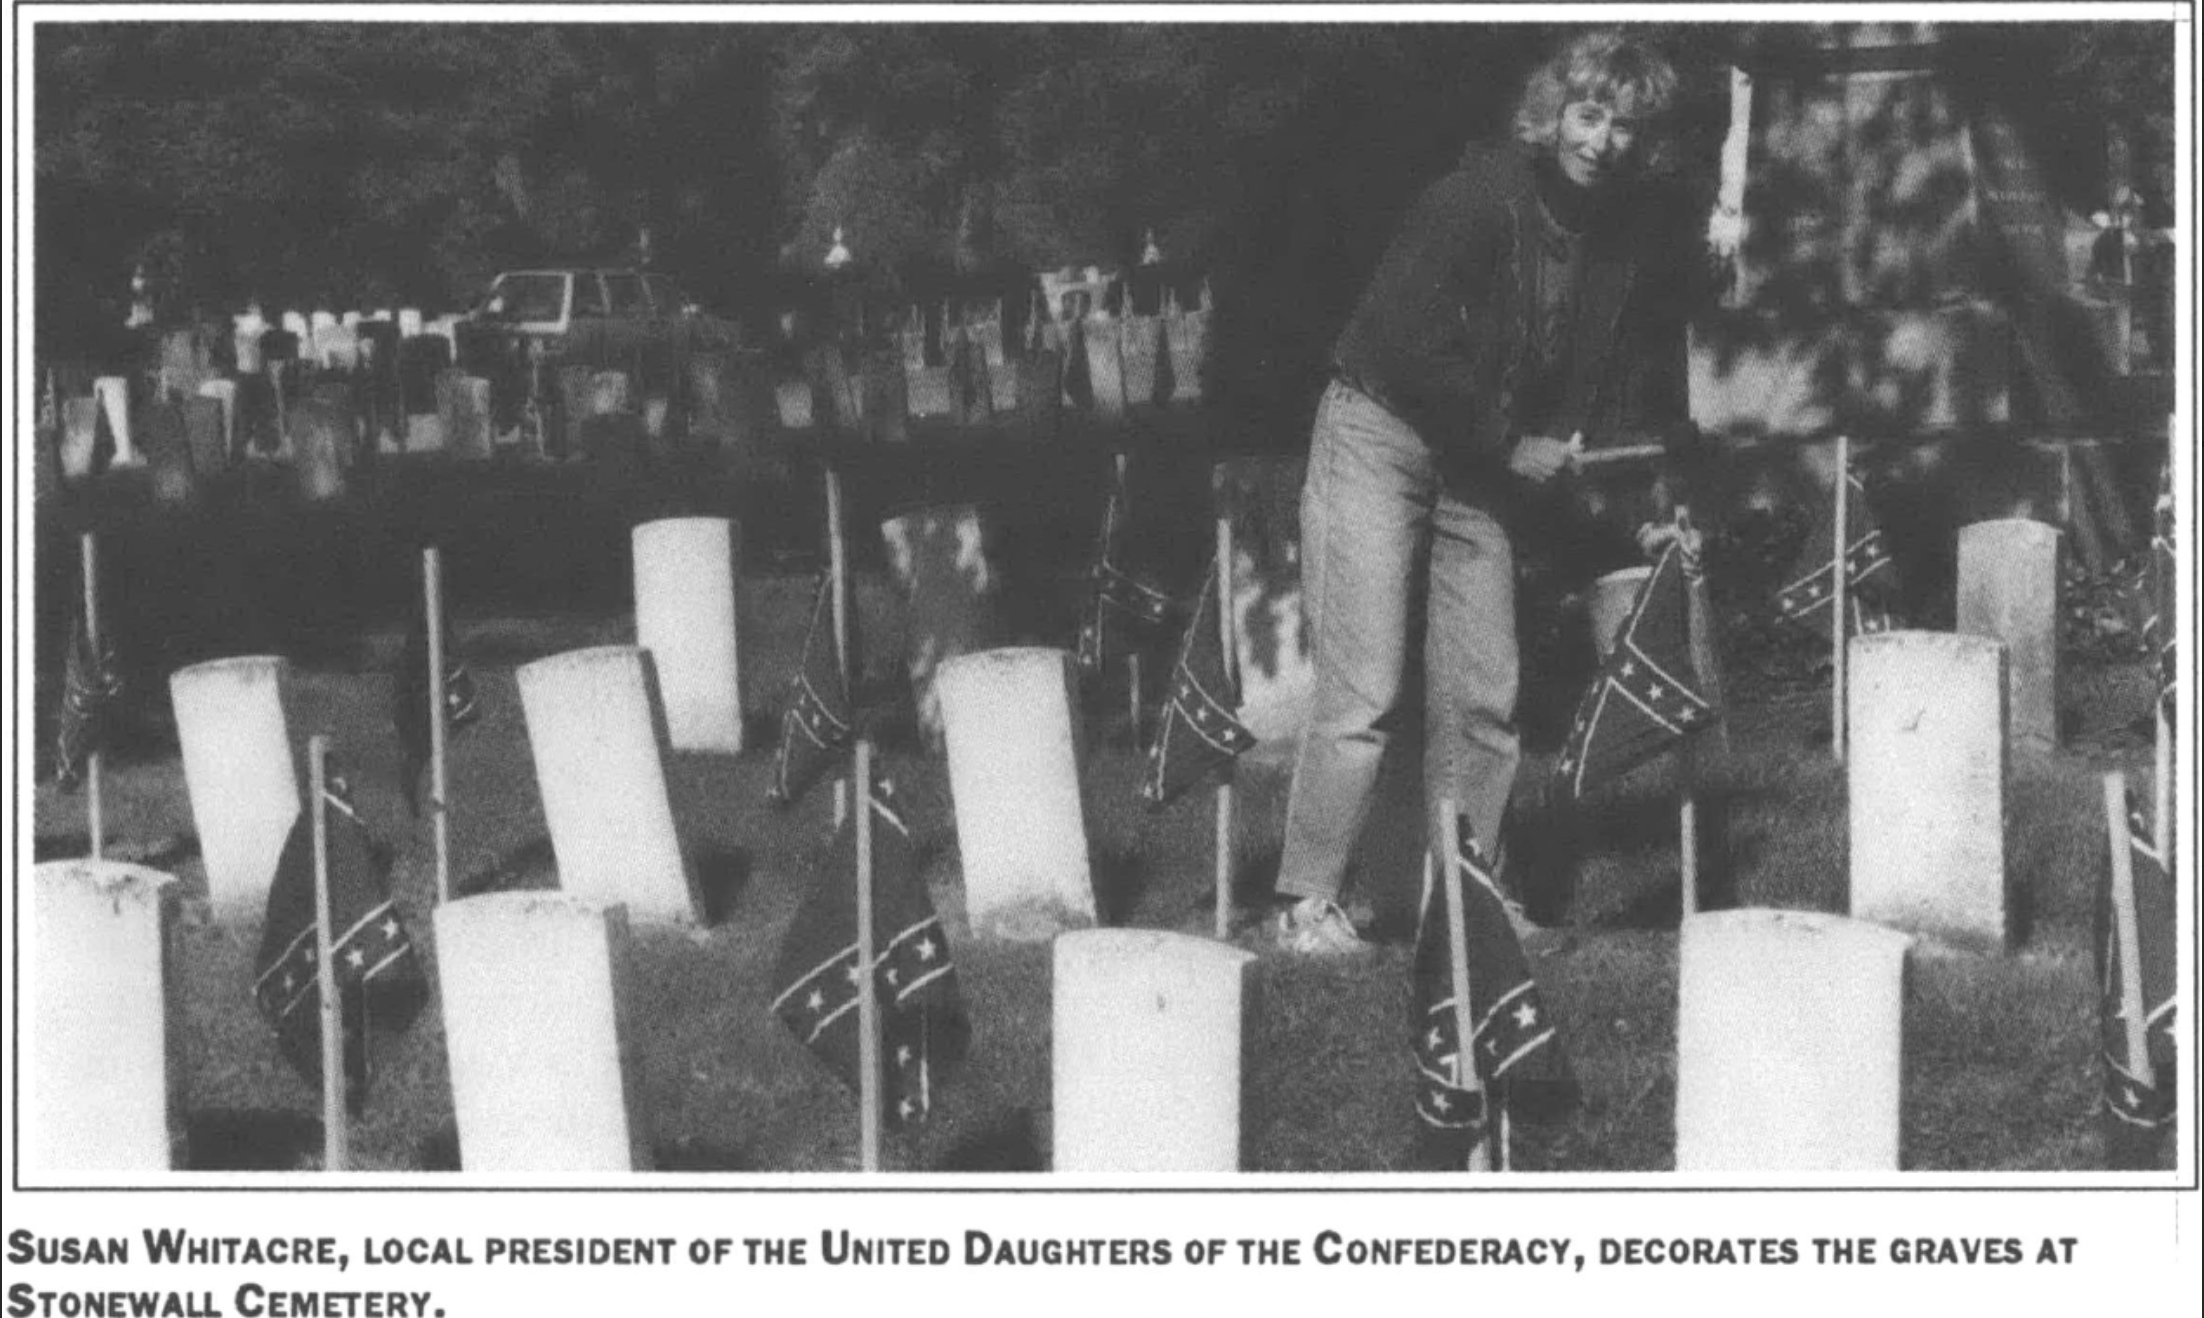 woman decorating graves with Confederate flags